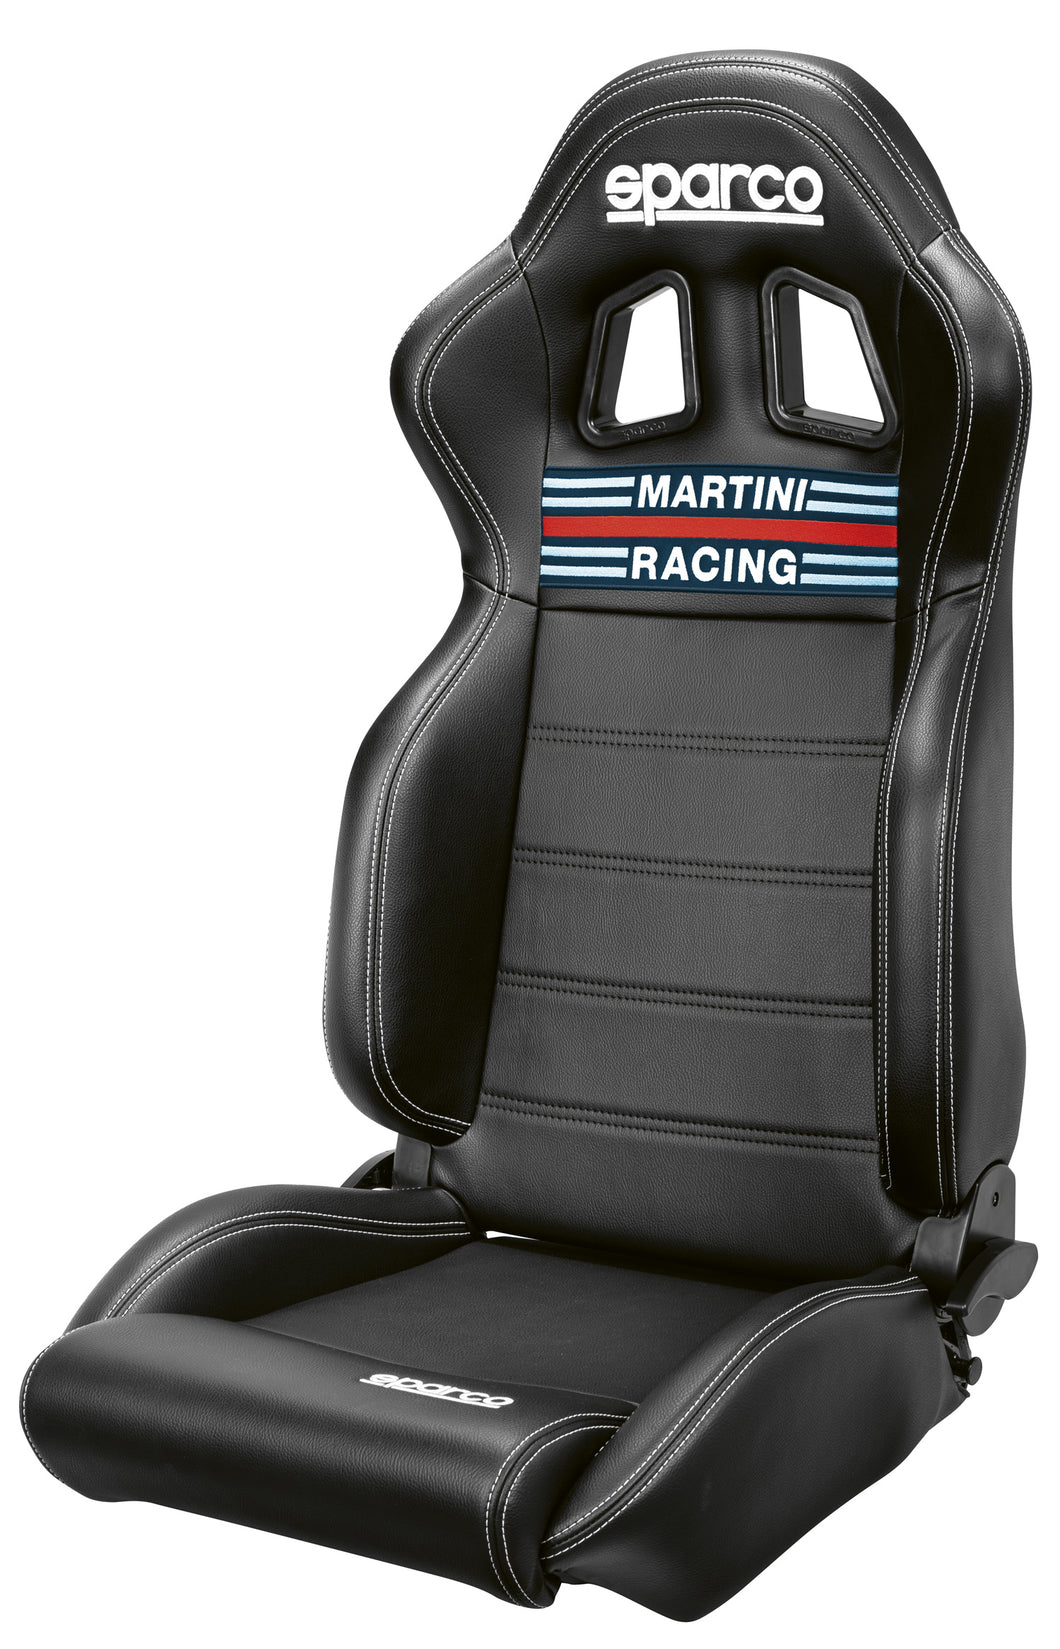 Sparco sports seat R100 Martini Racing leather